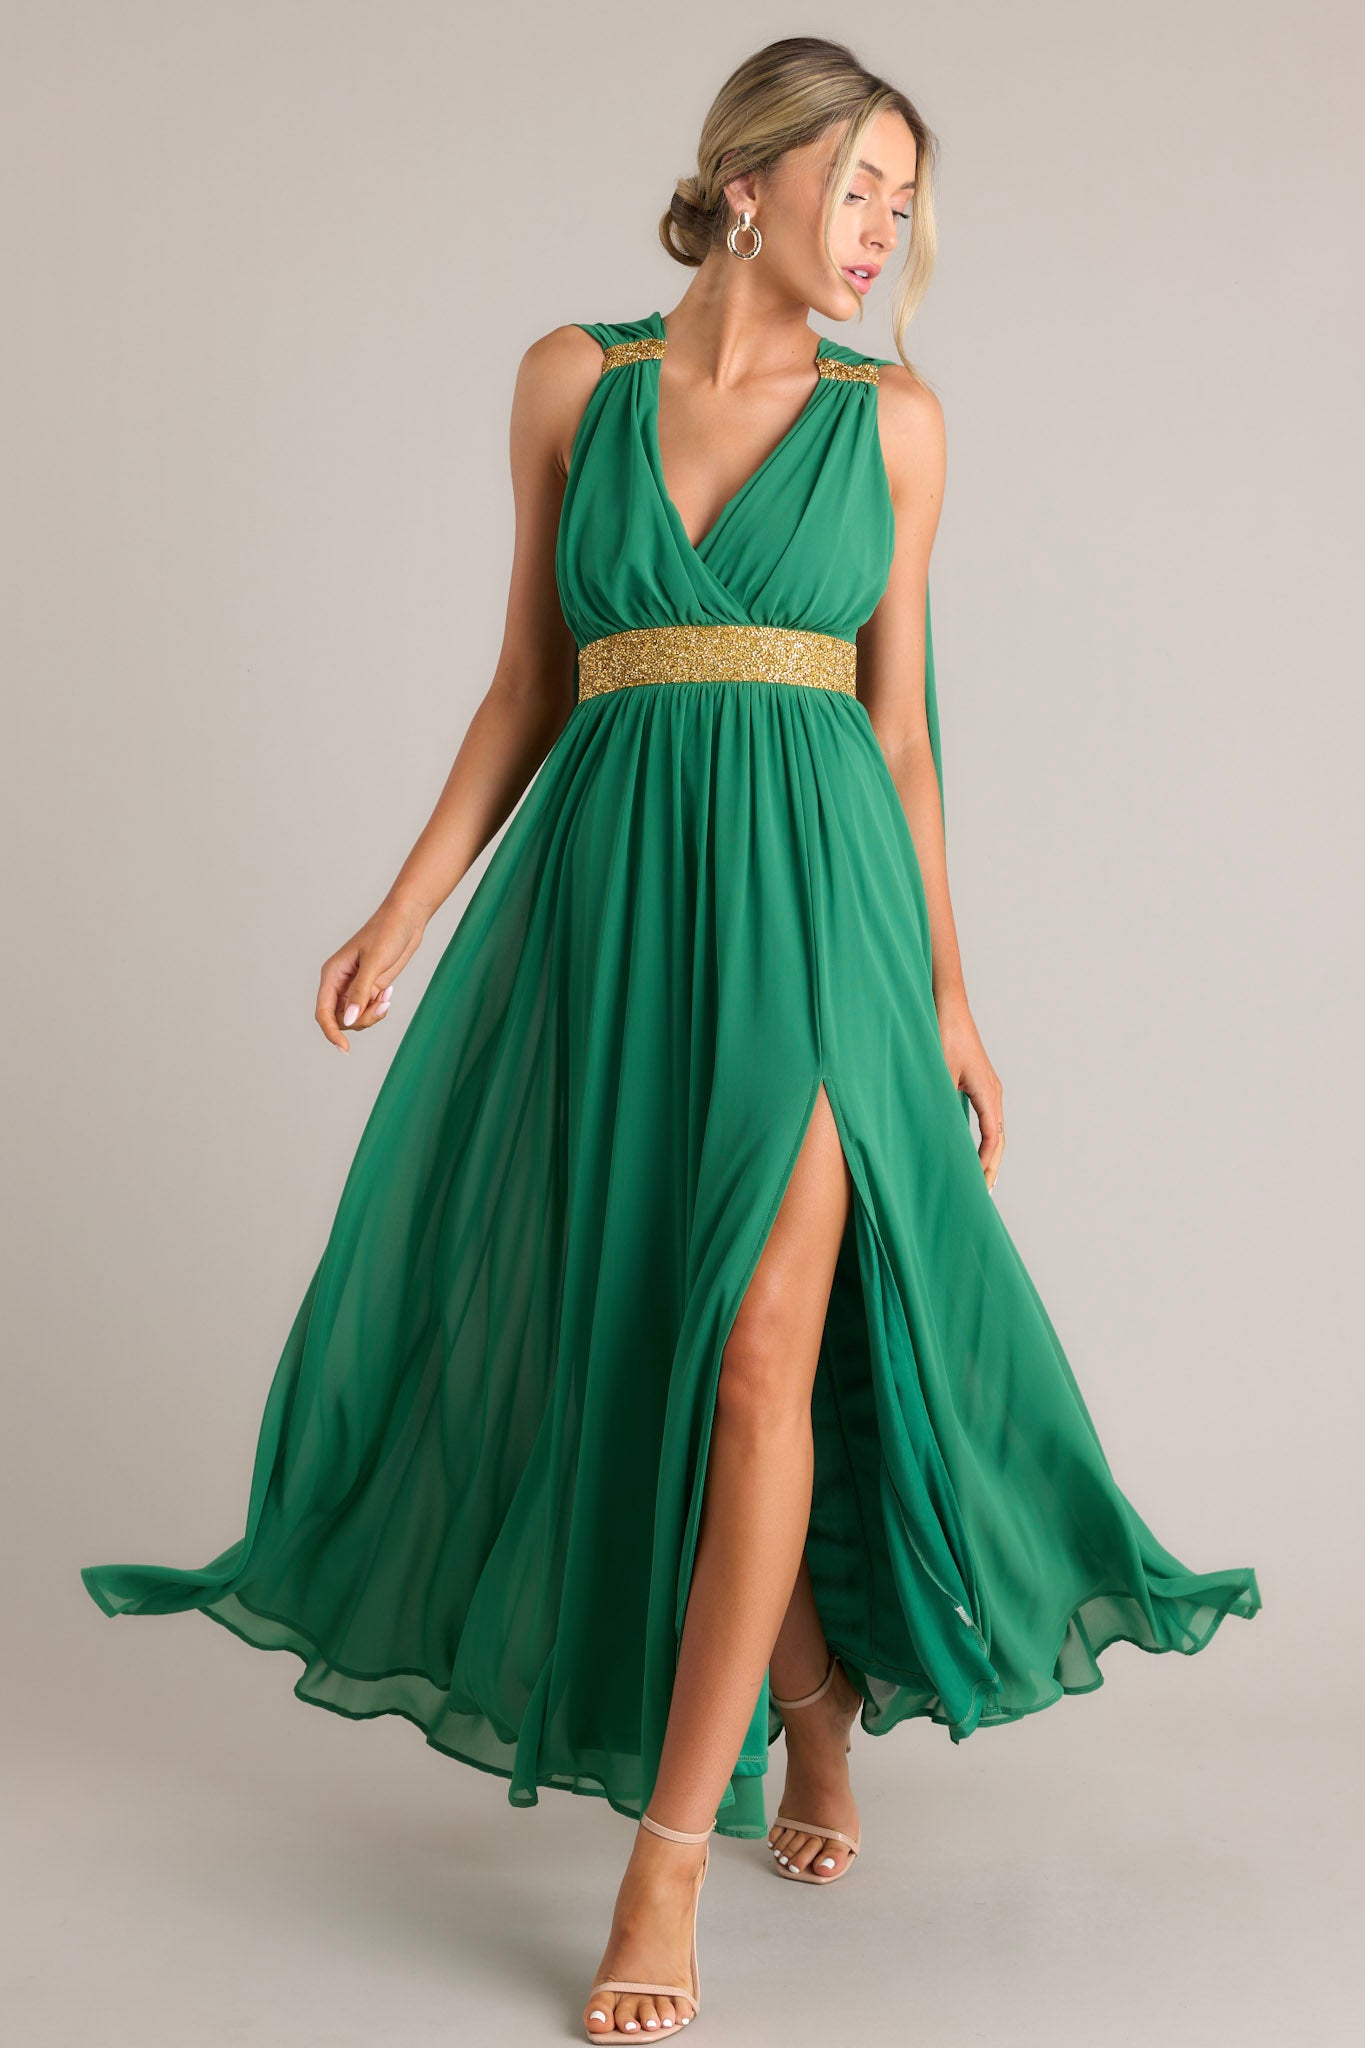 This green dress features a v-neckline, adjustable crisscross straps down the back, rhinestone detailing, fabric trailing from the shoulder to the bottom of the dress, and a slit on the left side of the skirt.